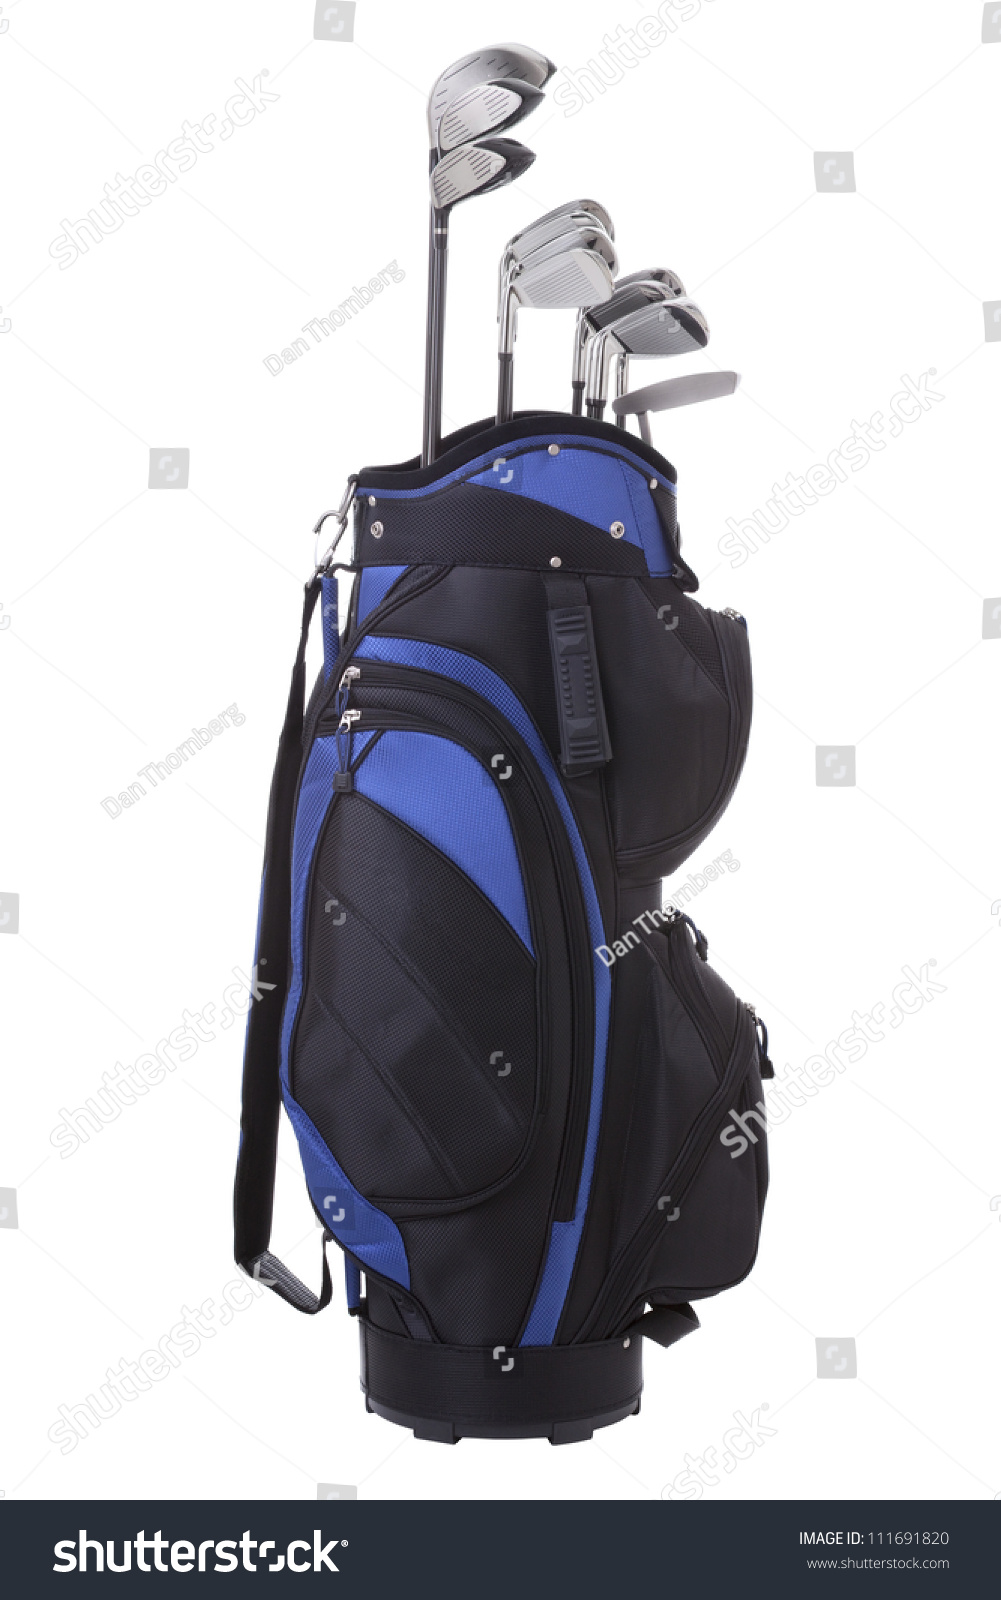 Golf clubs in blue and black bag isolated on white #111691820